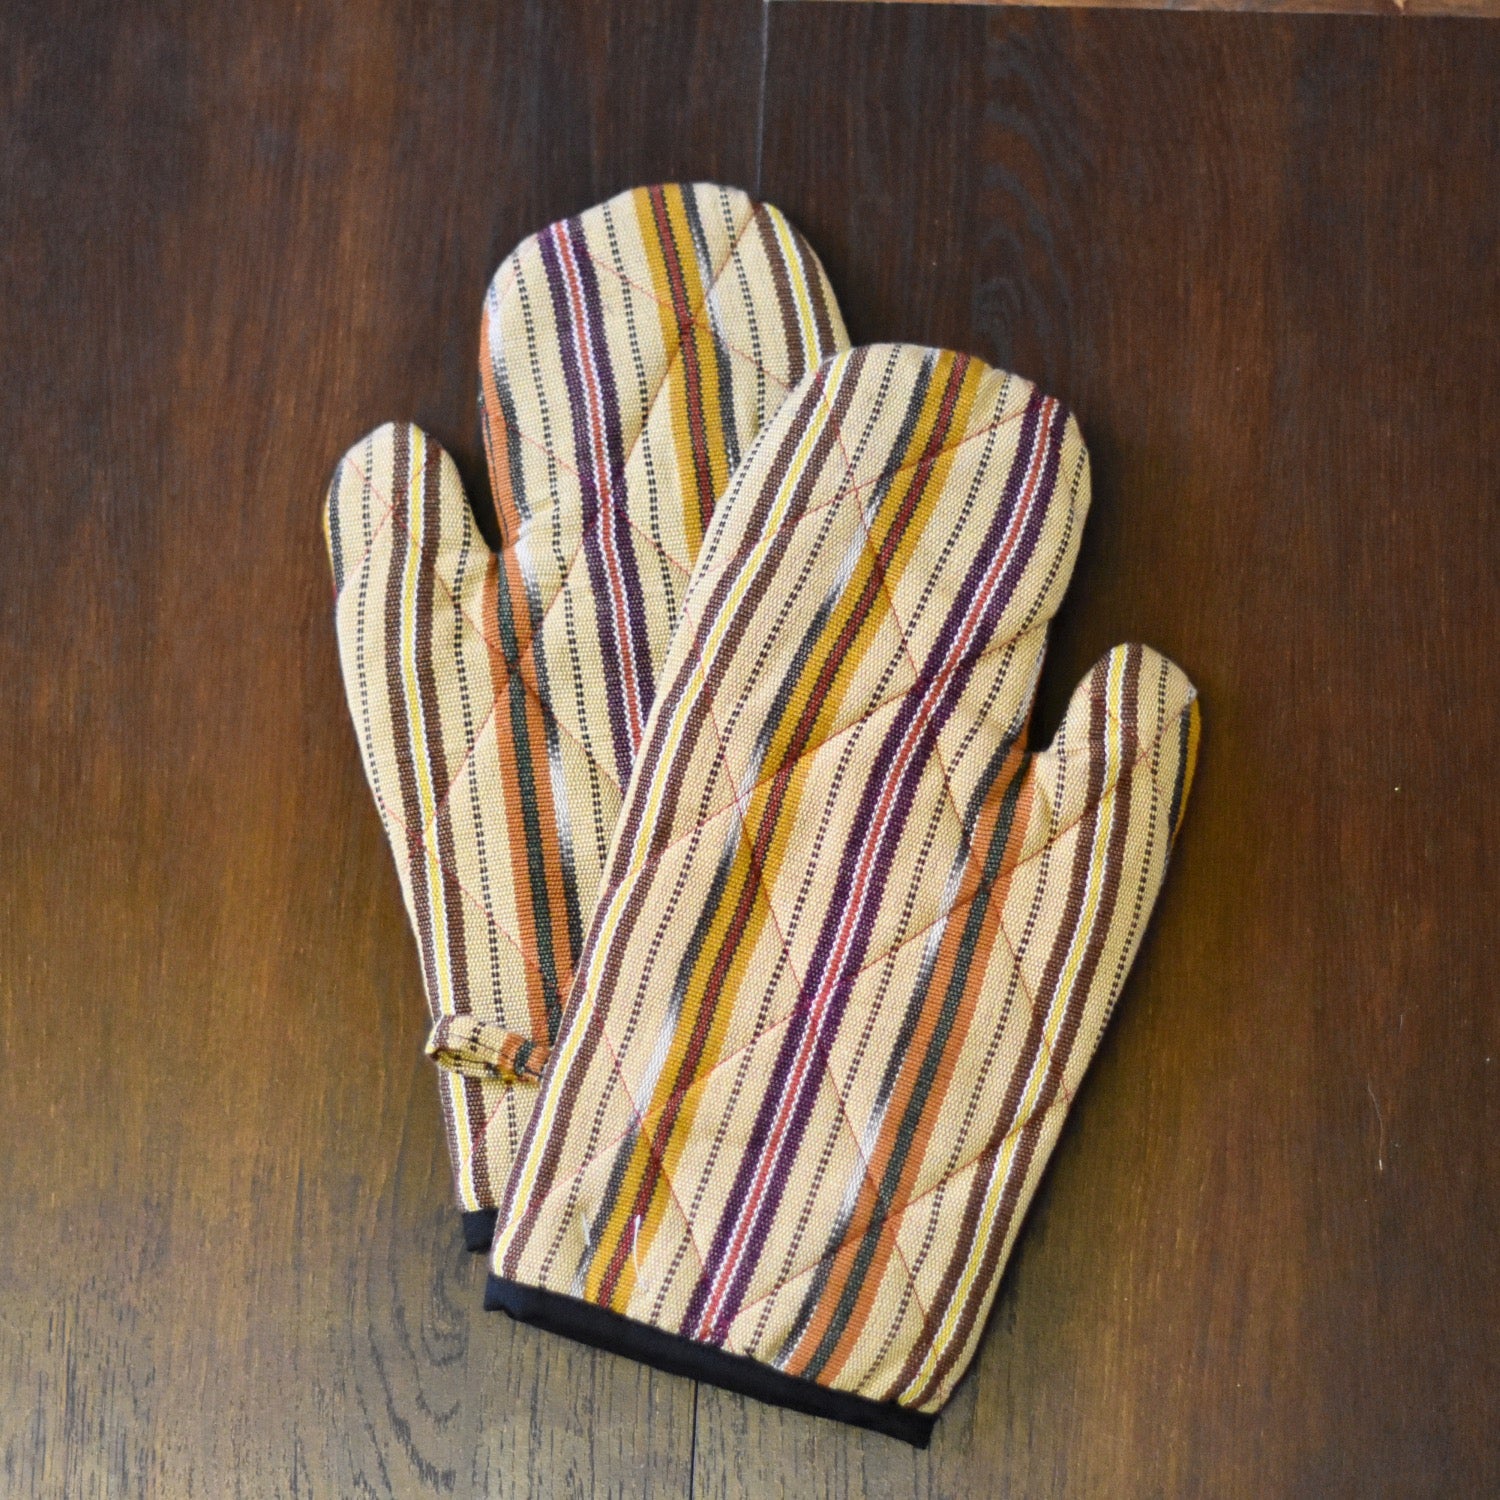 The Oven Mitts Set of 2